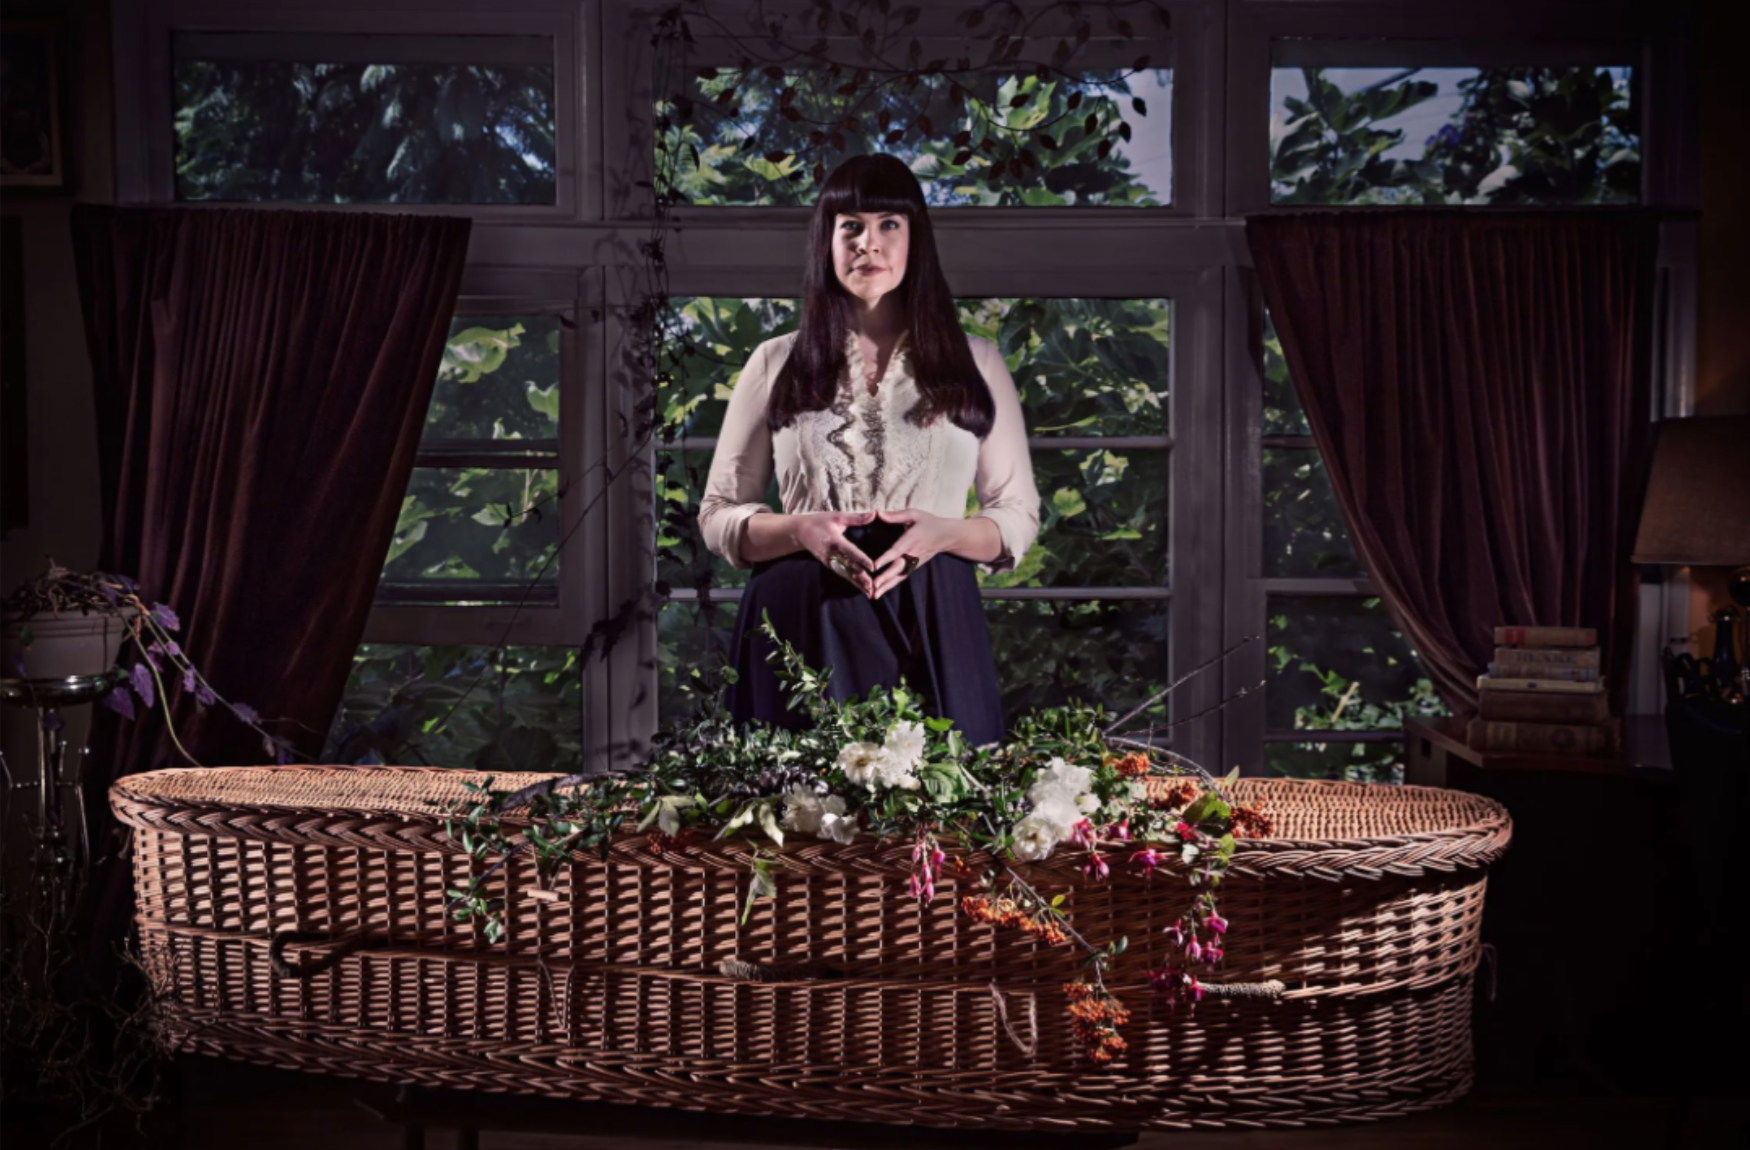 A dark-haired woman in a ruffled blouse with hands together over a woven basket casket covered in flowers. This is the Order of the Good Death founder, Caitlin Doughty